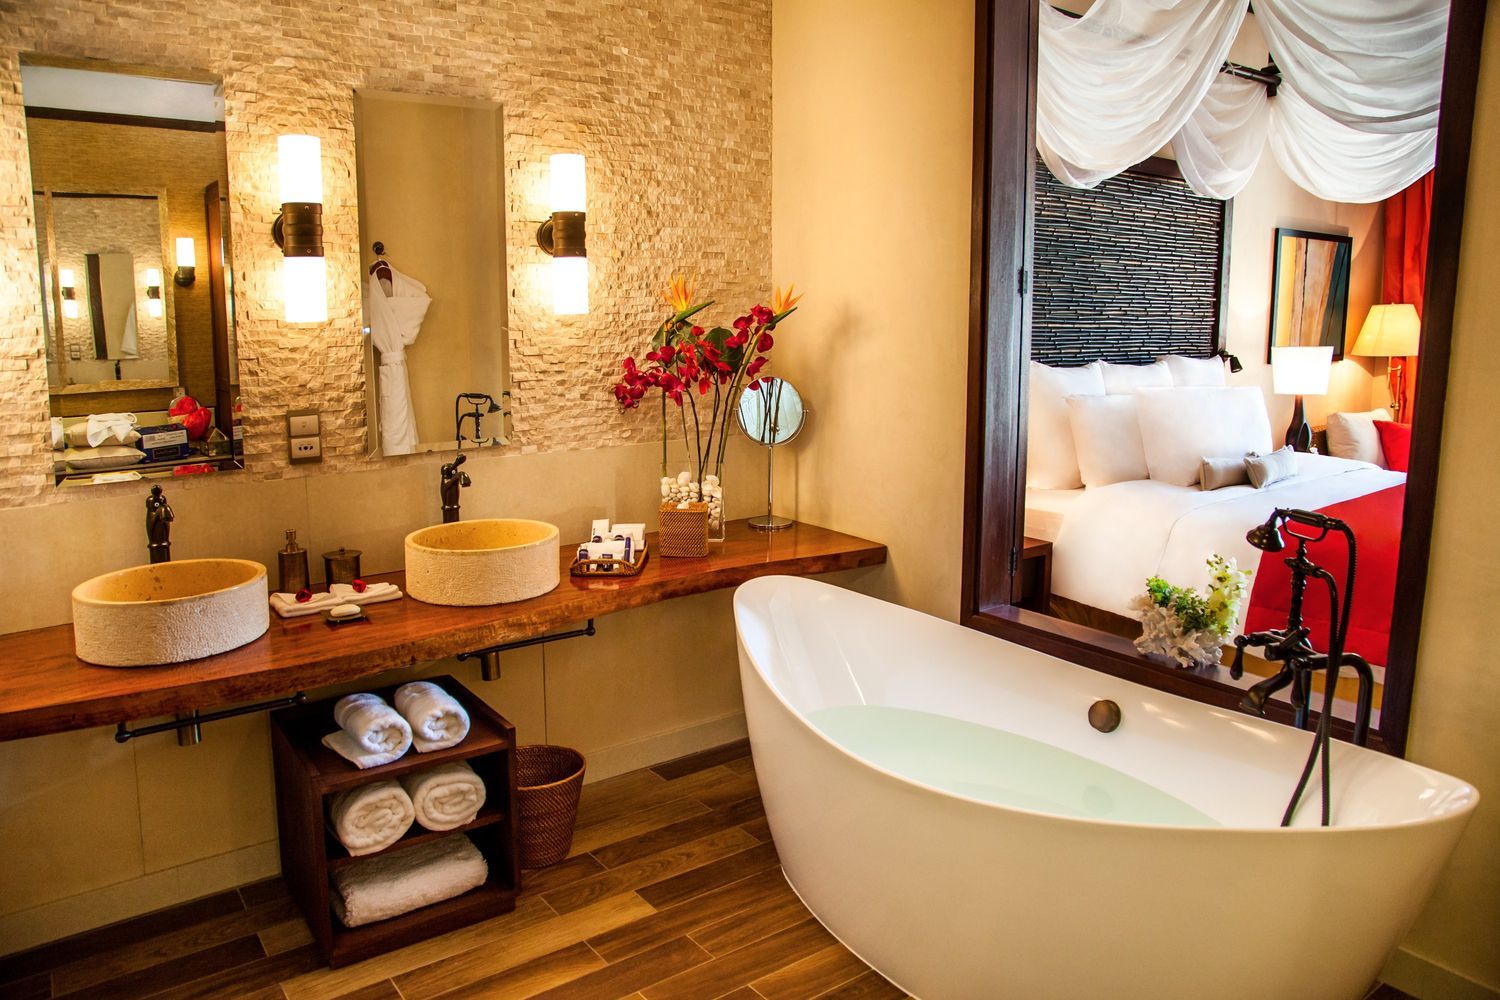 A suite's luxurious bathroom with dual stone basins, a standalone bathtub, and a reflection of the bedroom with white draping and red accents in Seychelles.